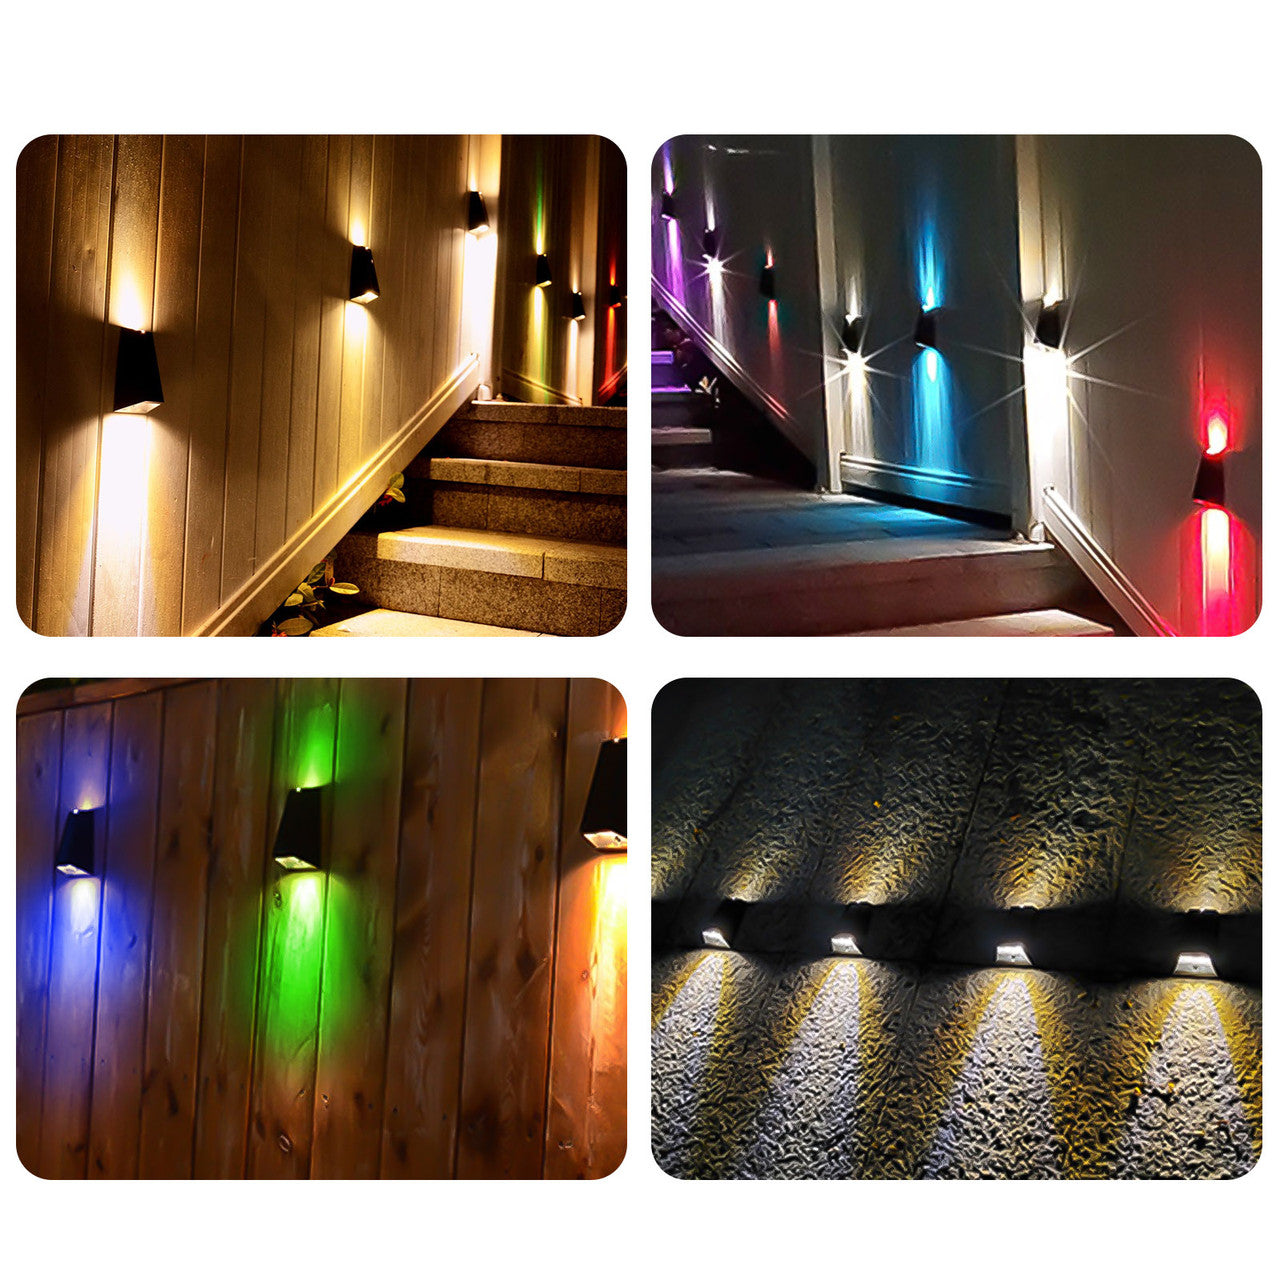 Solar Colorful Wall Light with a Solar Power Supply, Waterproof and Easy to Install